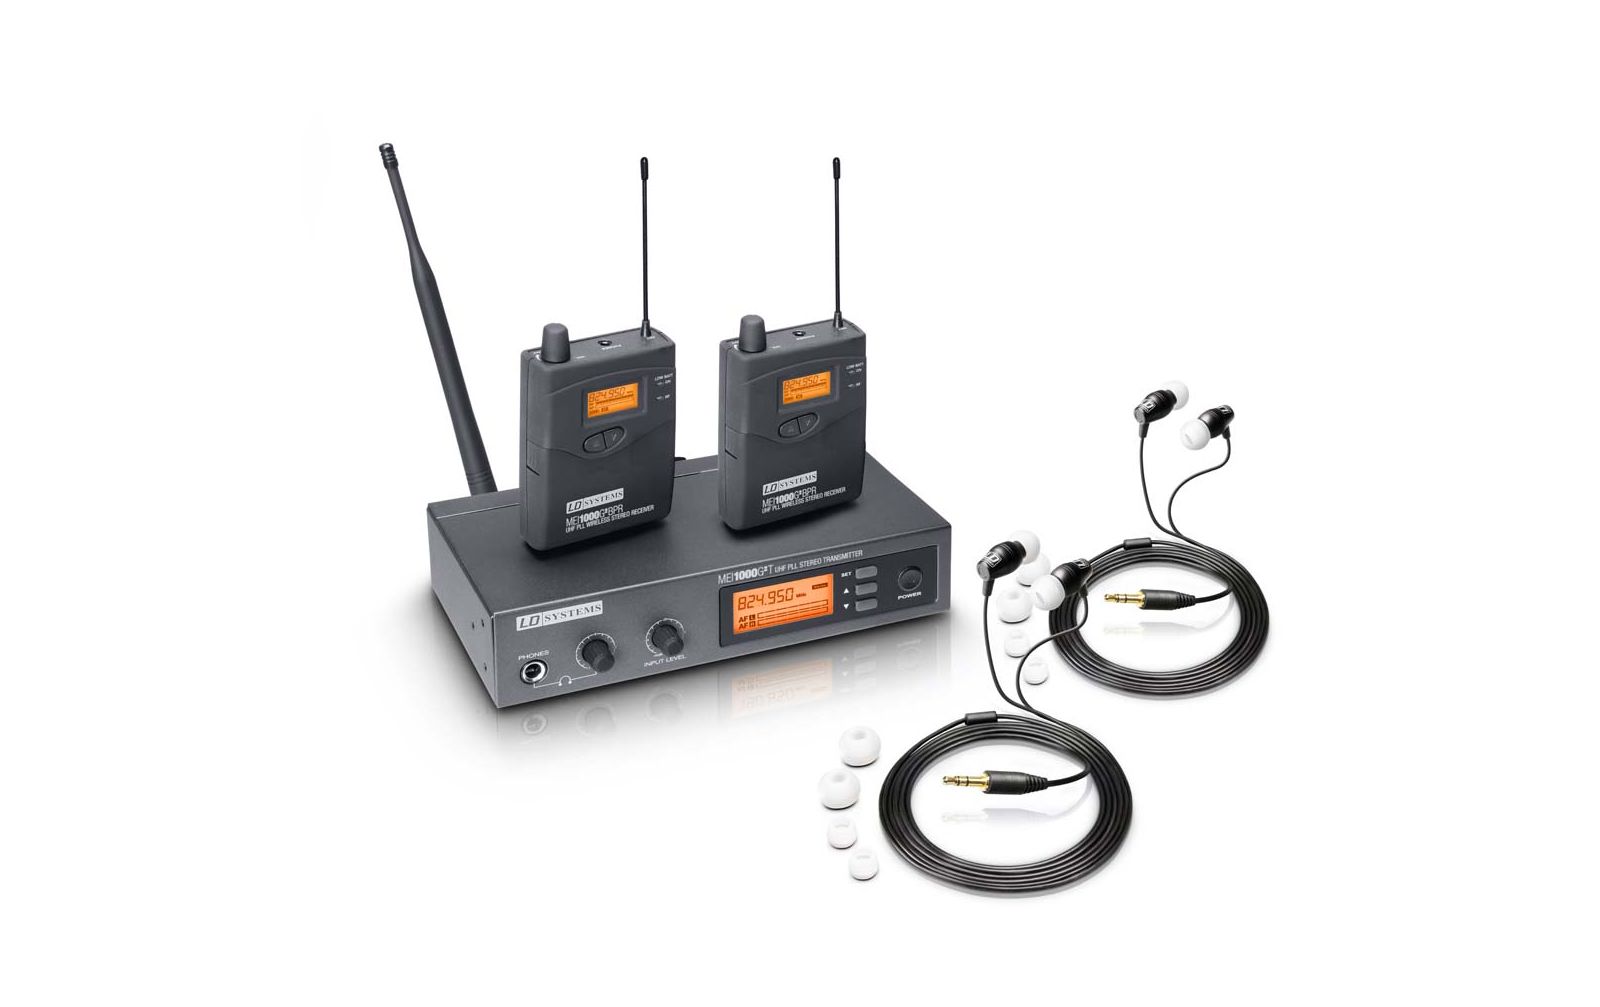 LD Systems MEI 1000 G2 In-Ear Monitoring System drahtlos von LD Systems